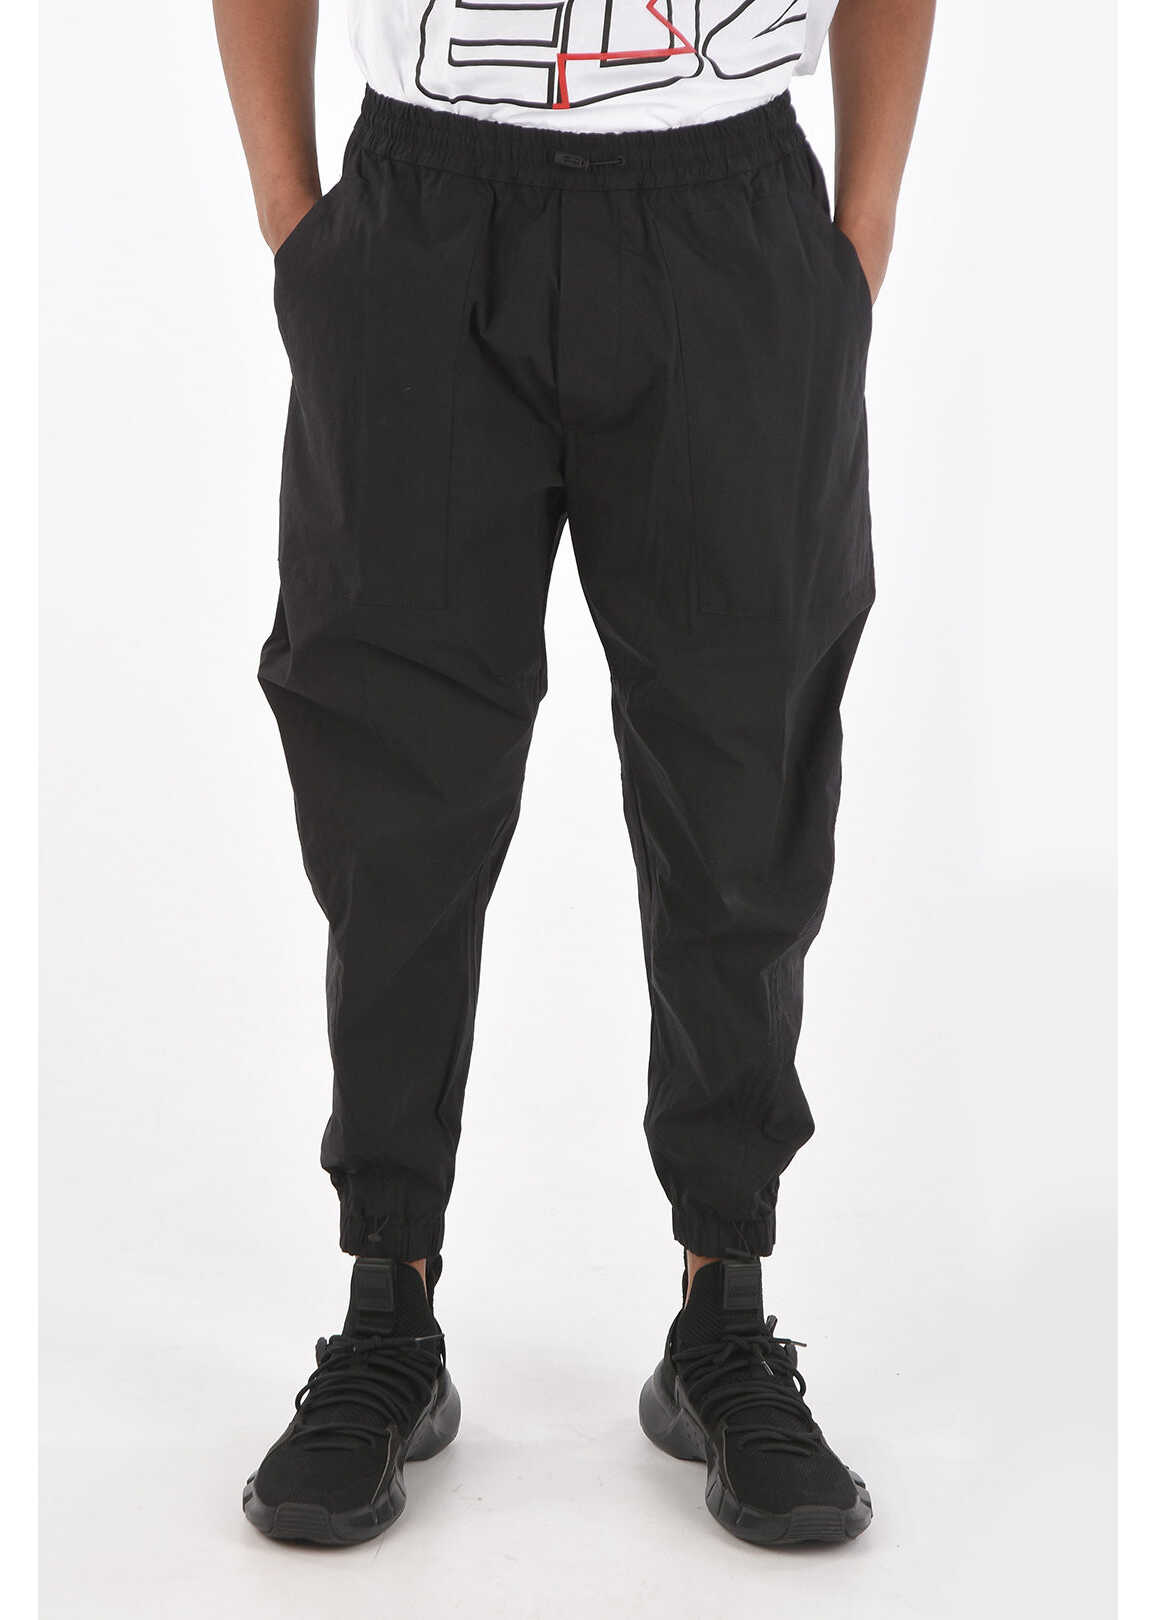 DSQUARED2 Cotton Stretch Pants With Drawstring Waist* Black image7